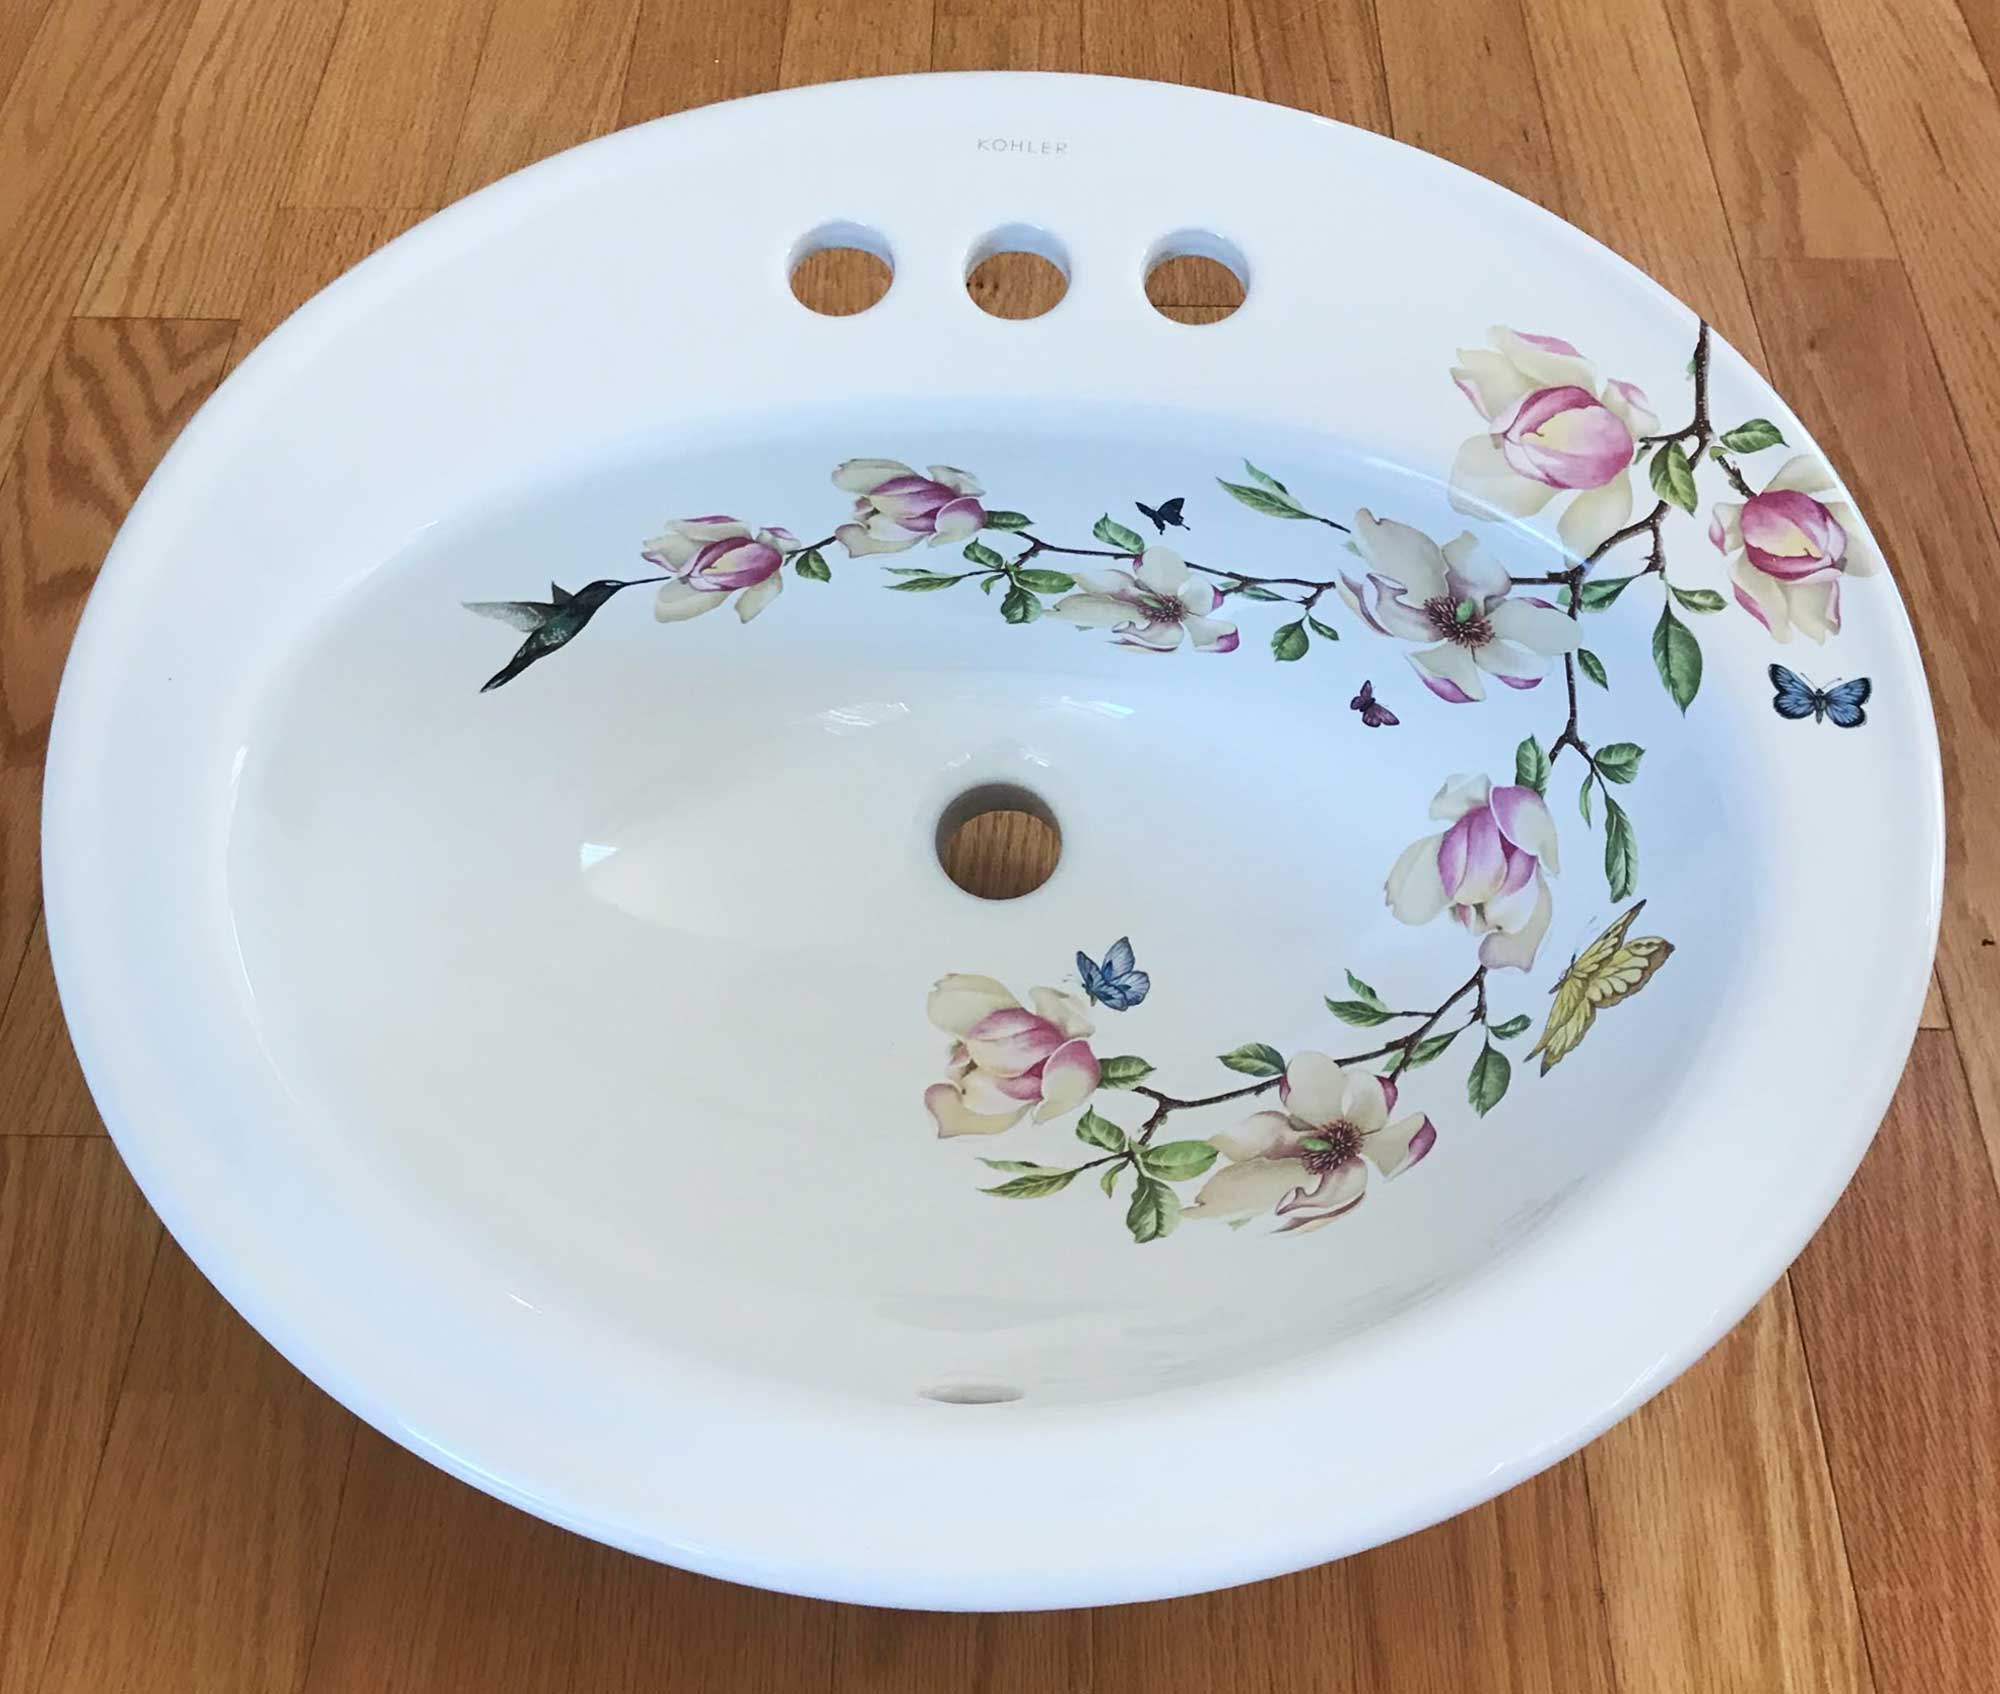 Magnolia Painted sink with several butterflies and a hummingbird